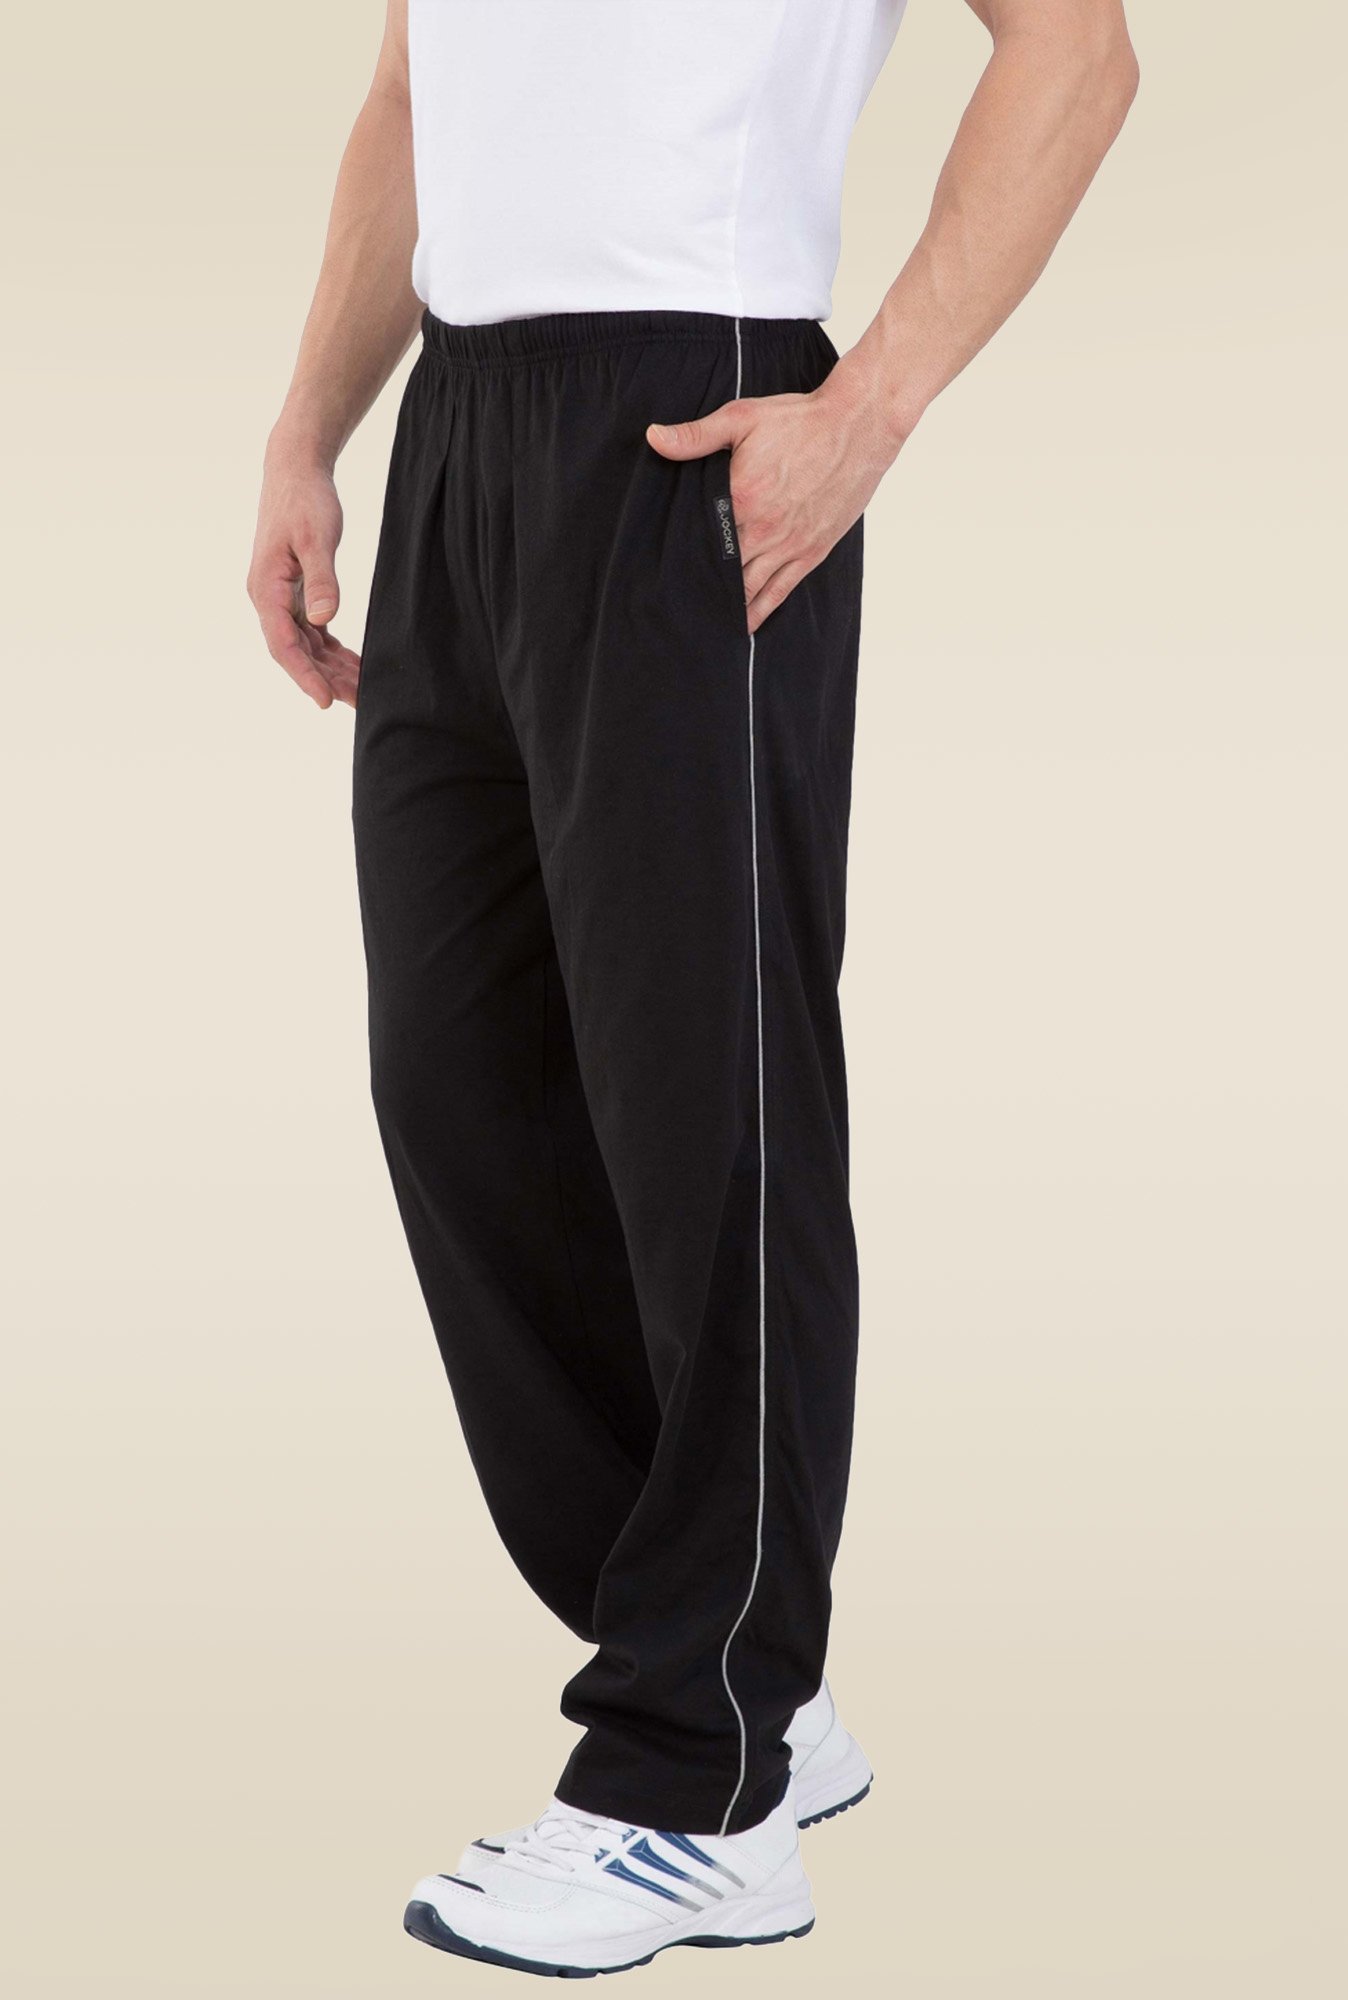 Jockey Mens Super Combed Cotton Straight Fit Track pant  9508  Online  Shopping site in India